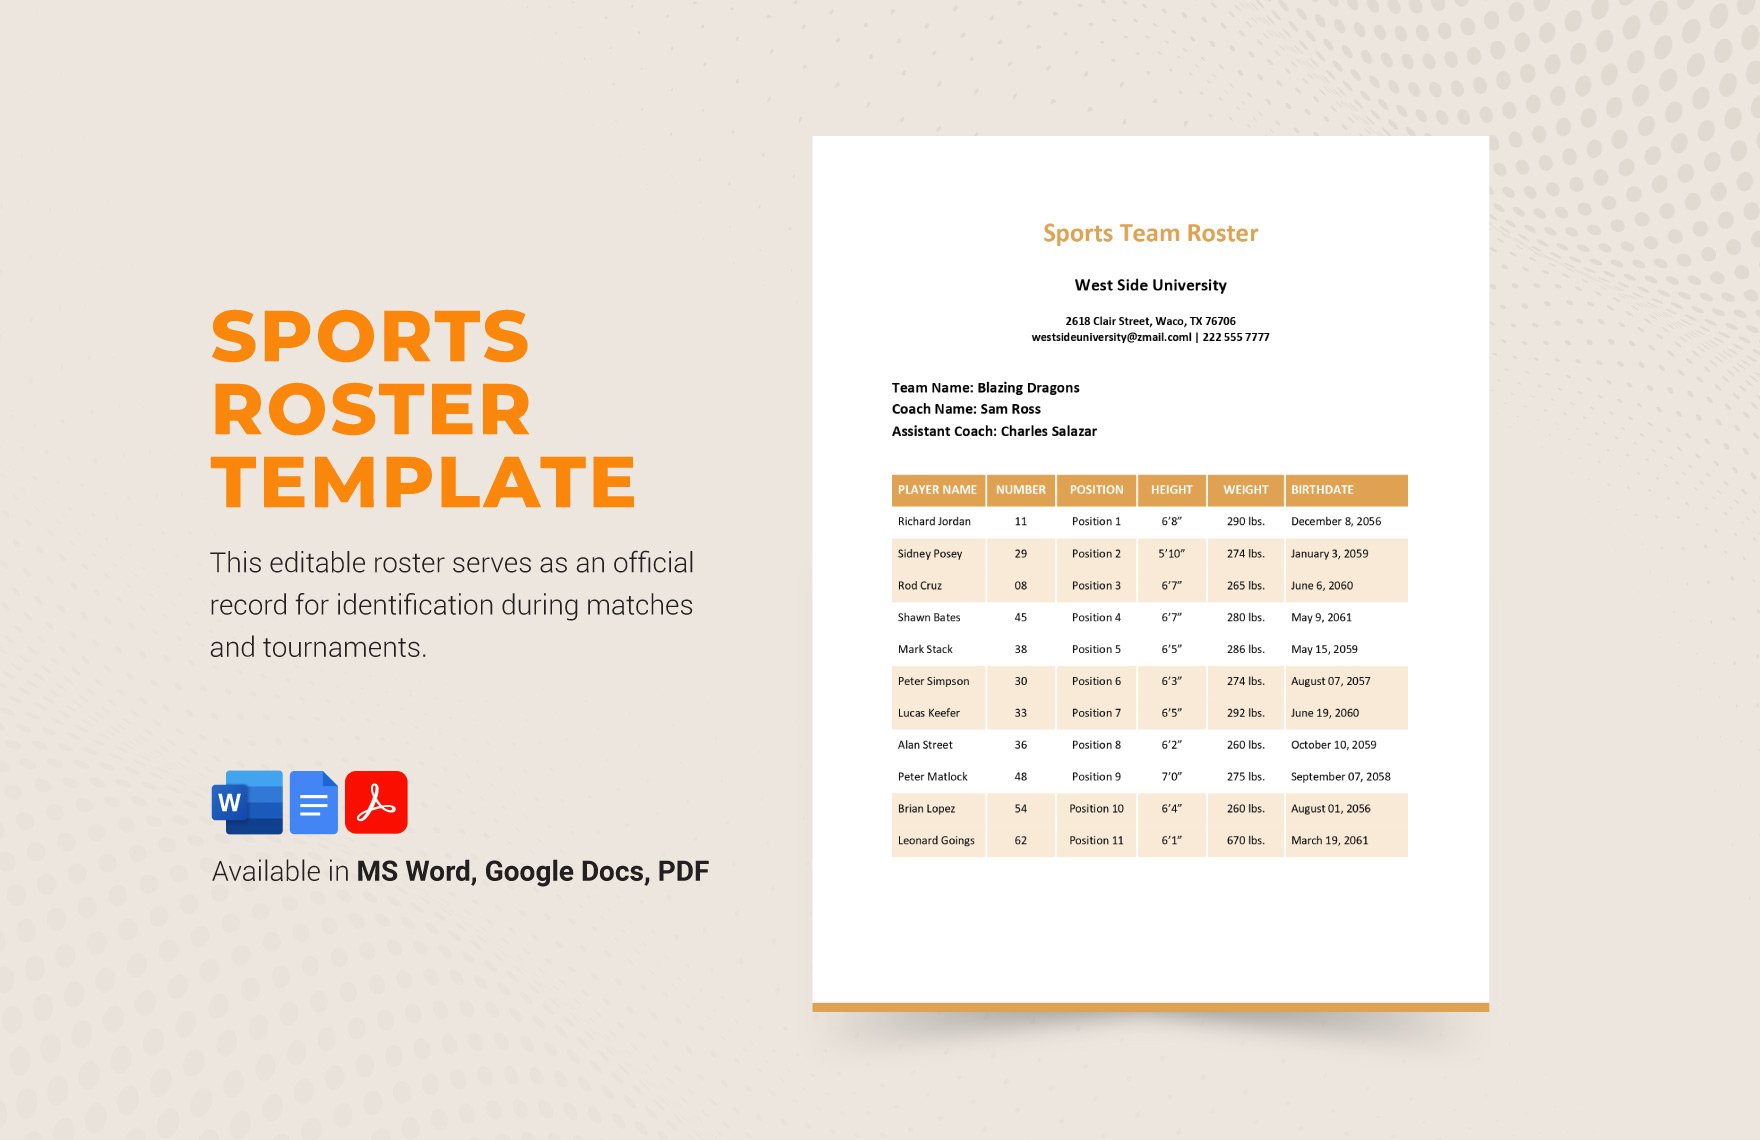 Sports Roster Template in Word, Google Docs, PDF